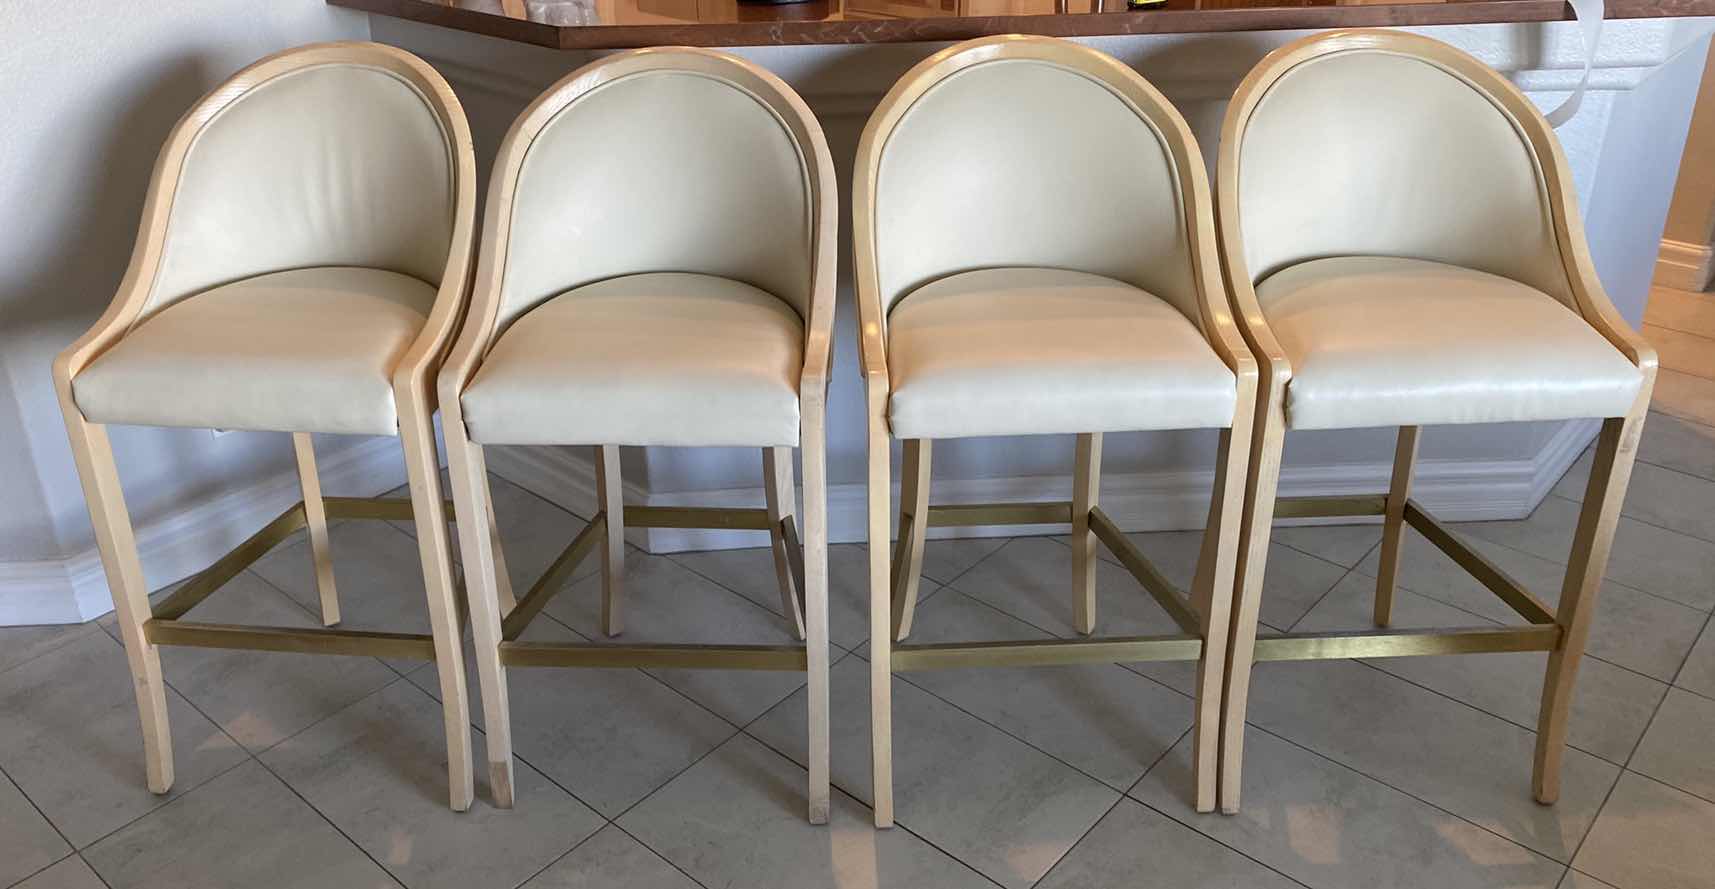 Photo 1 of 4 - CREAM COLOR LEATHER WITH LIGHT WOOD BAR STOOLS FROM THE WYNN - SEAT HEIGHT 31.5”